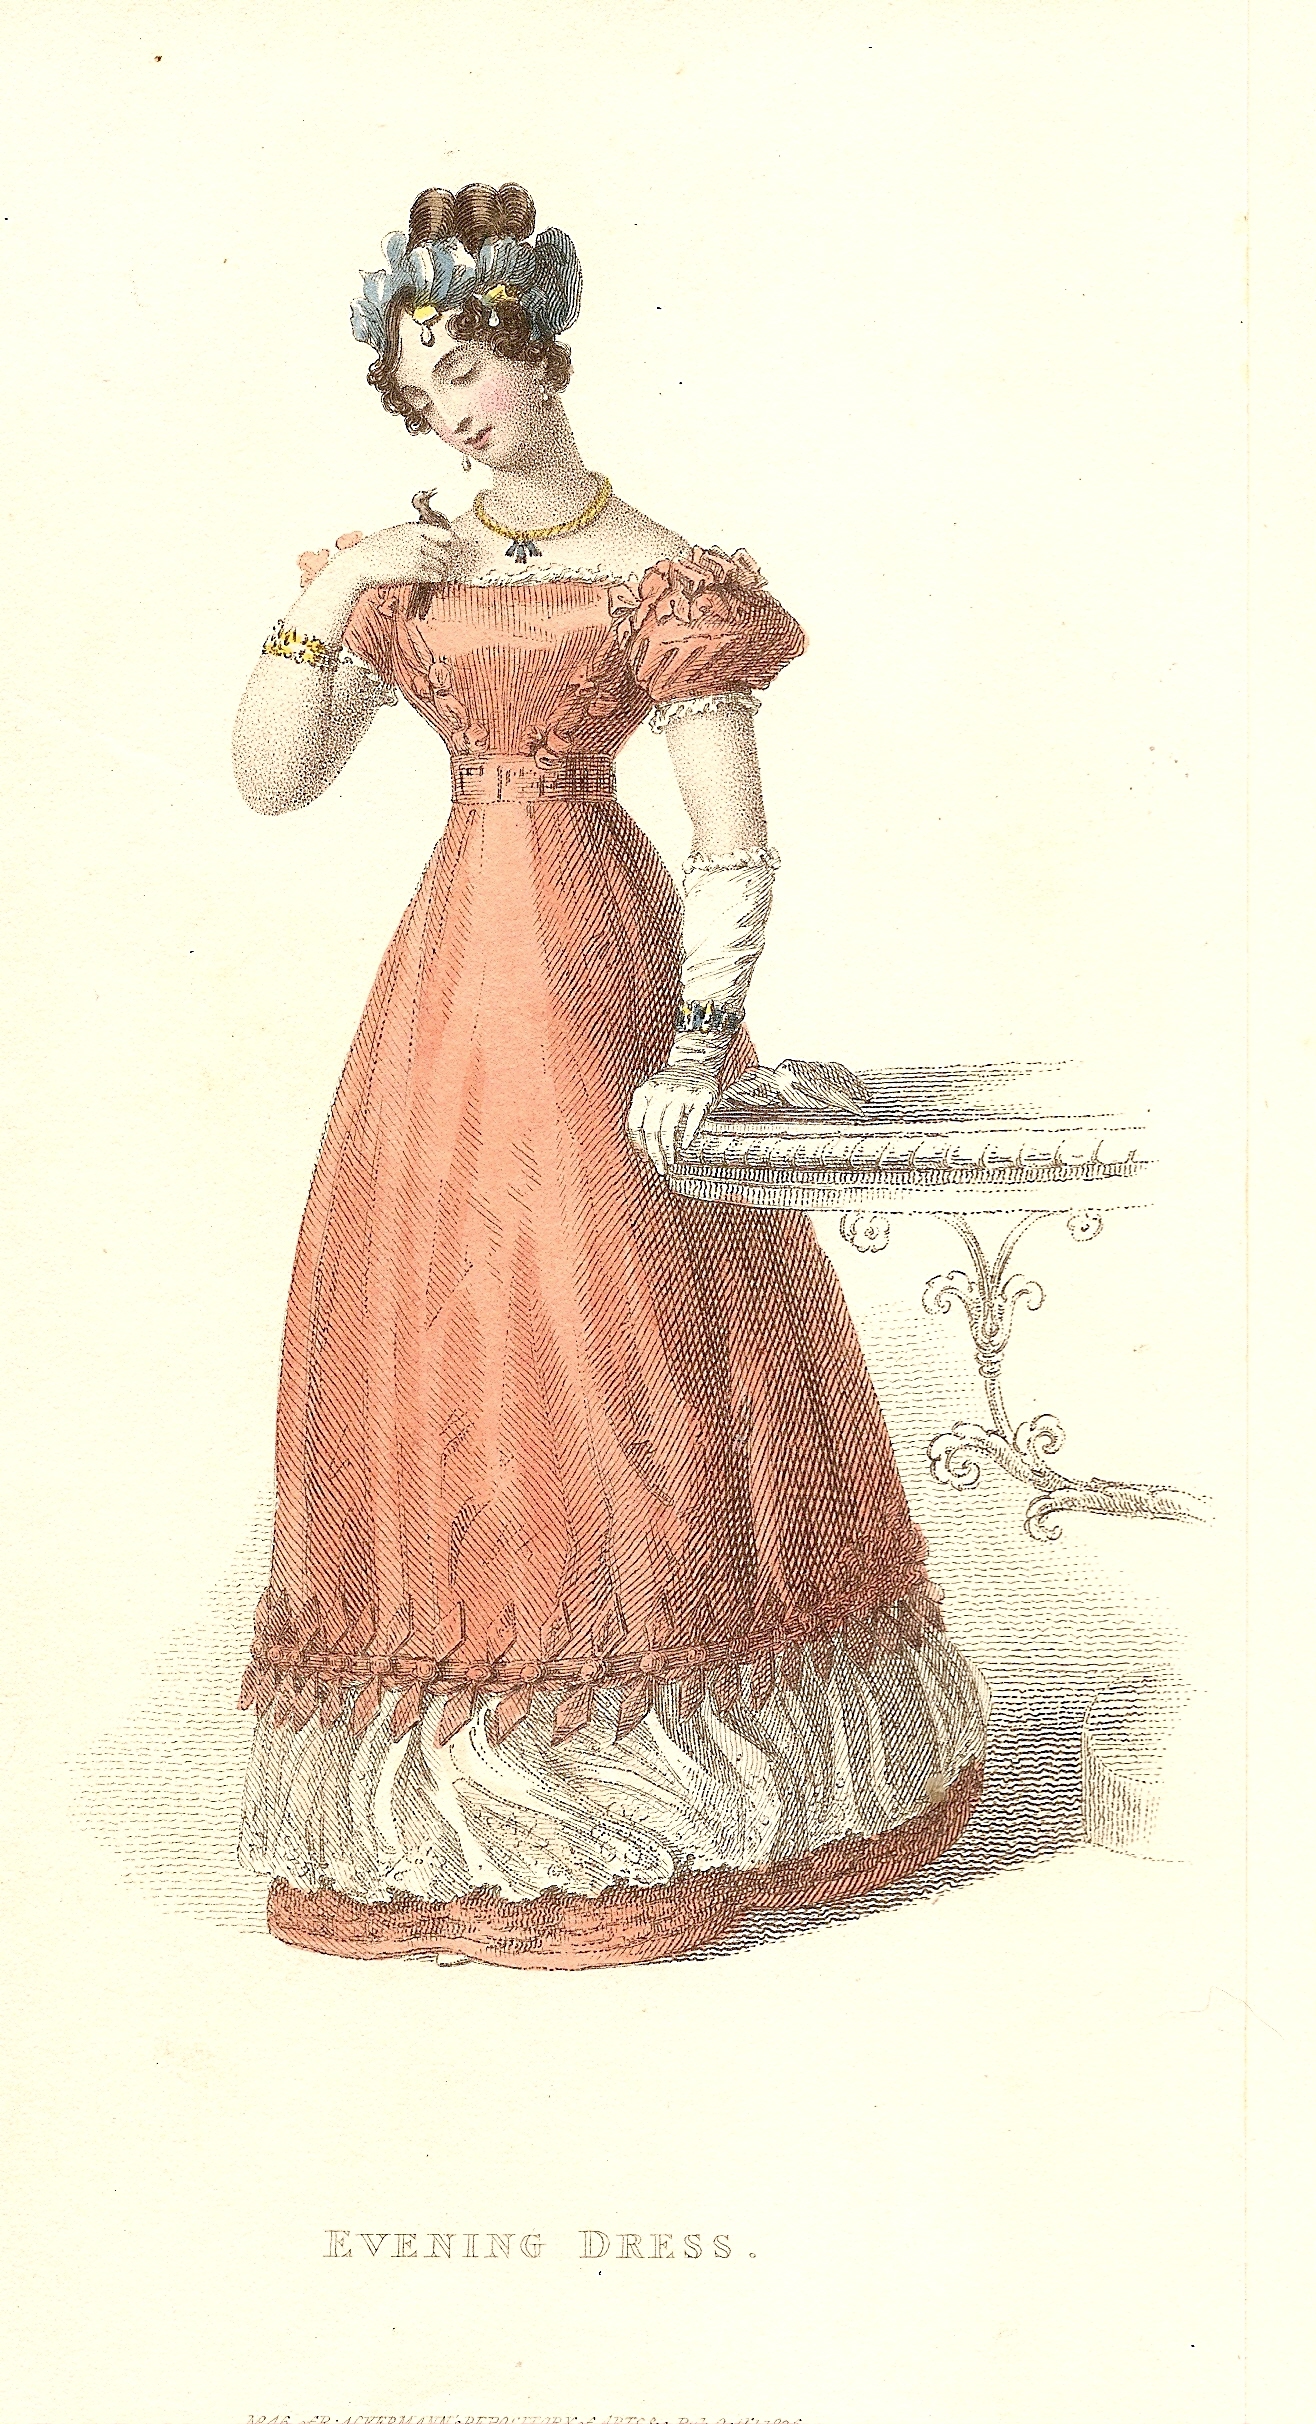 Prominent bracelets were de rigueur for evening wear, as seen in this fashion plate from Ackermann’s Repository of Arts, October 1826